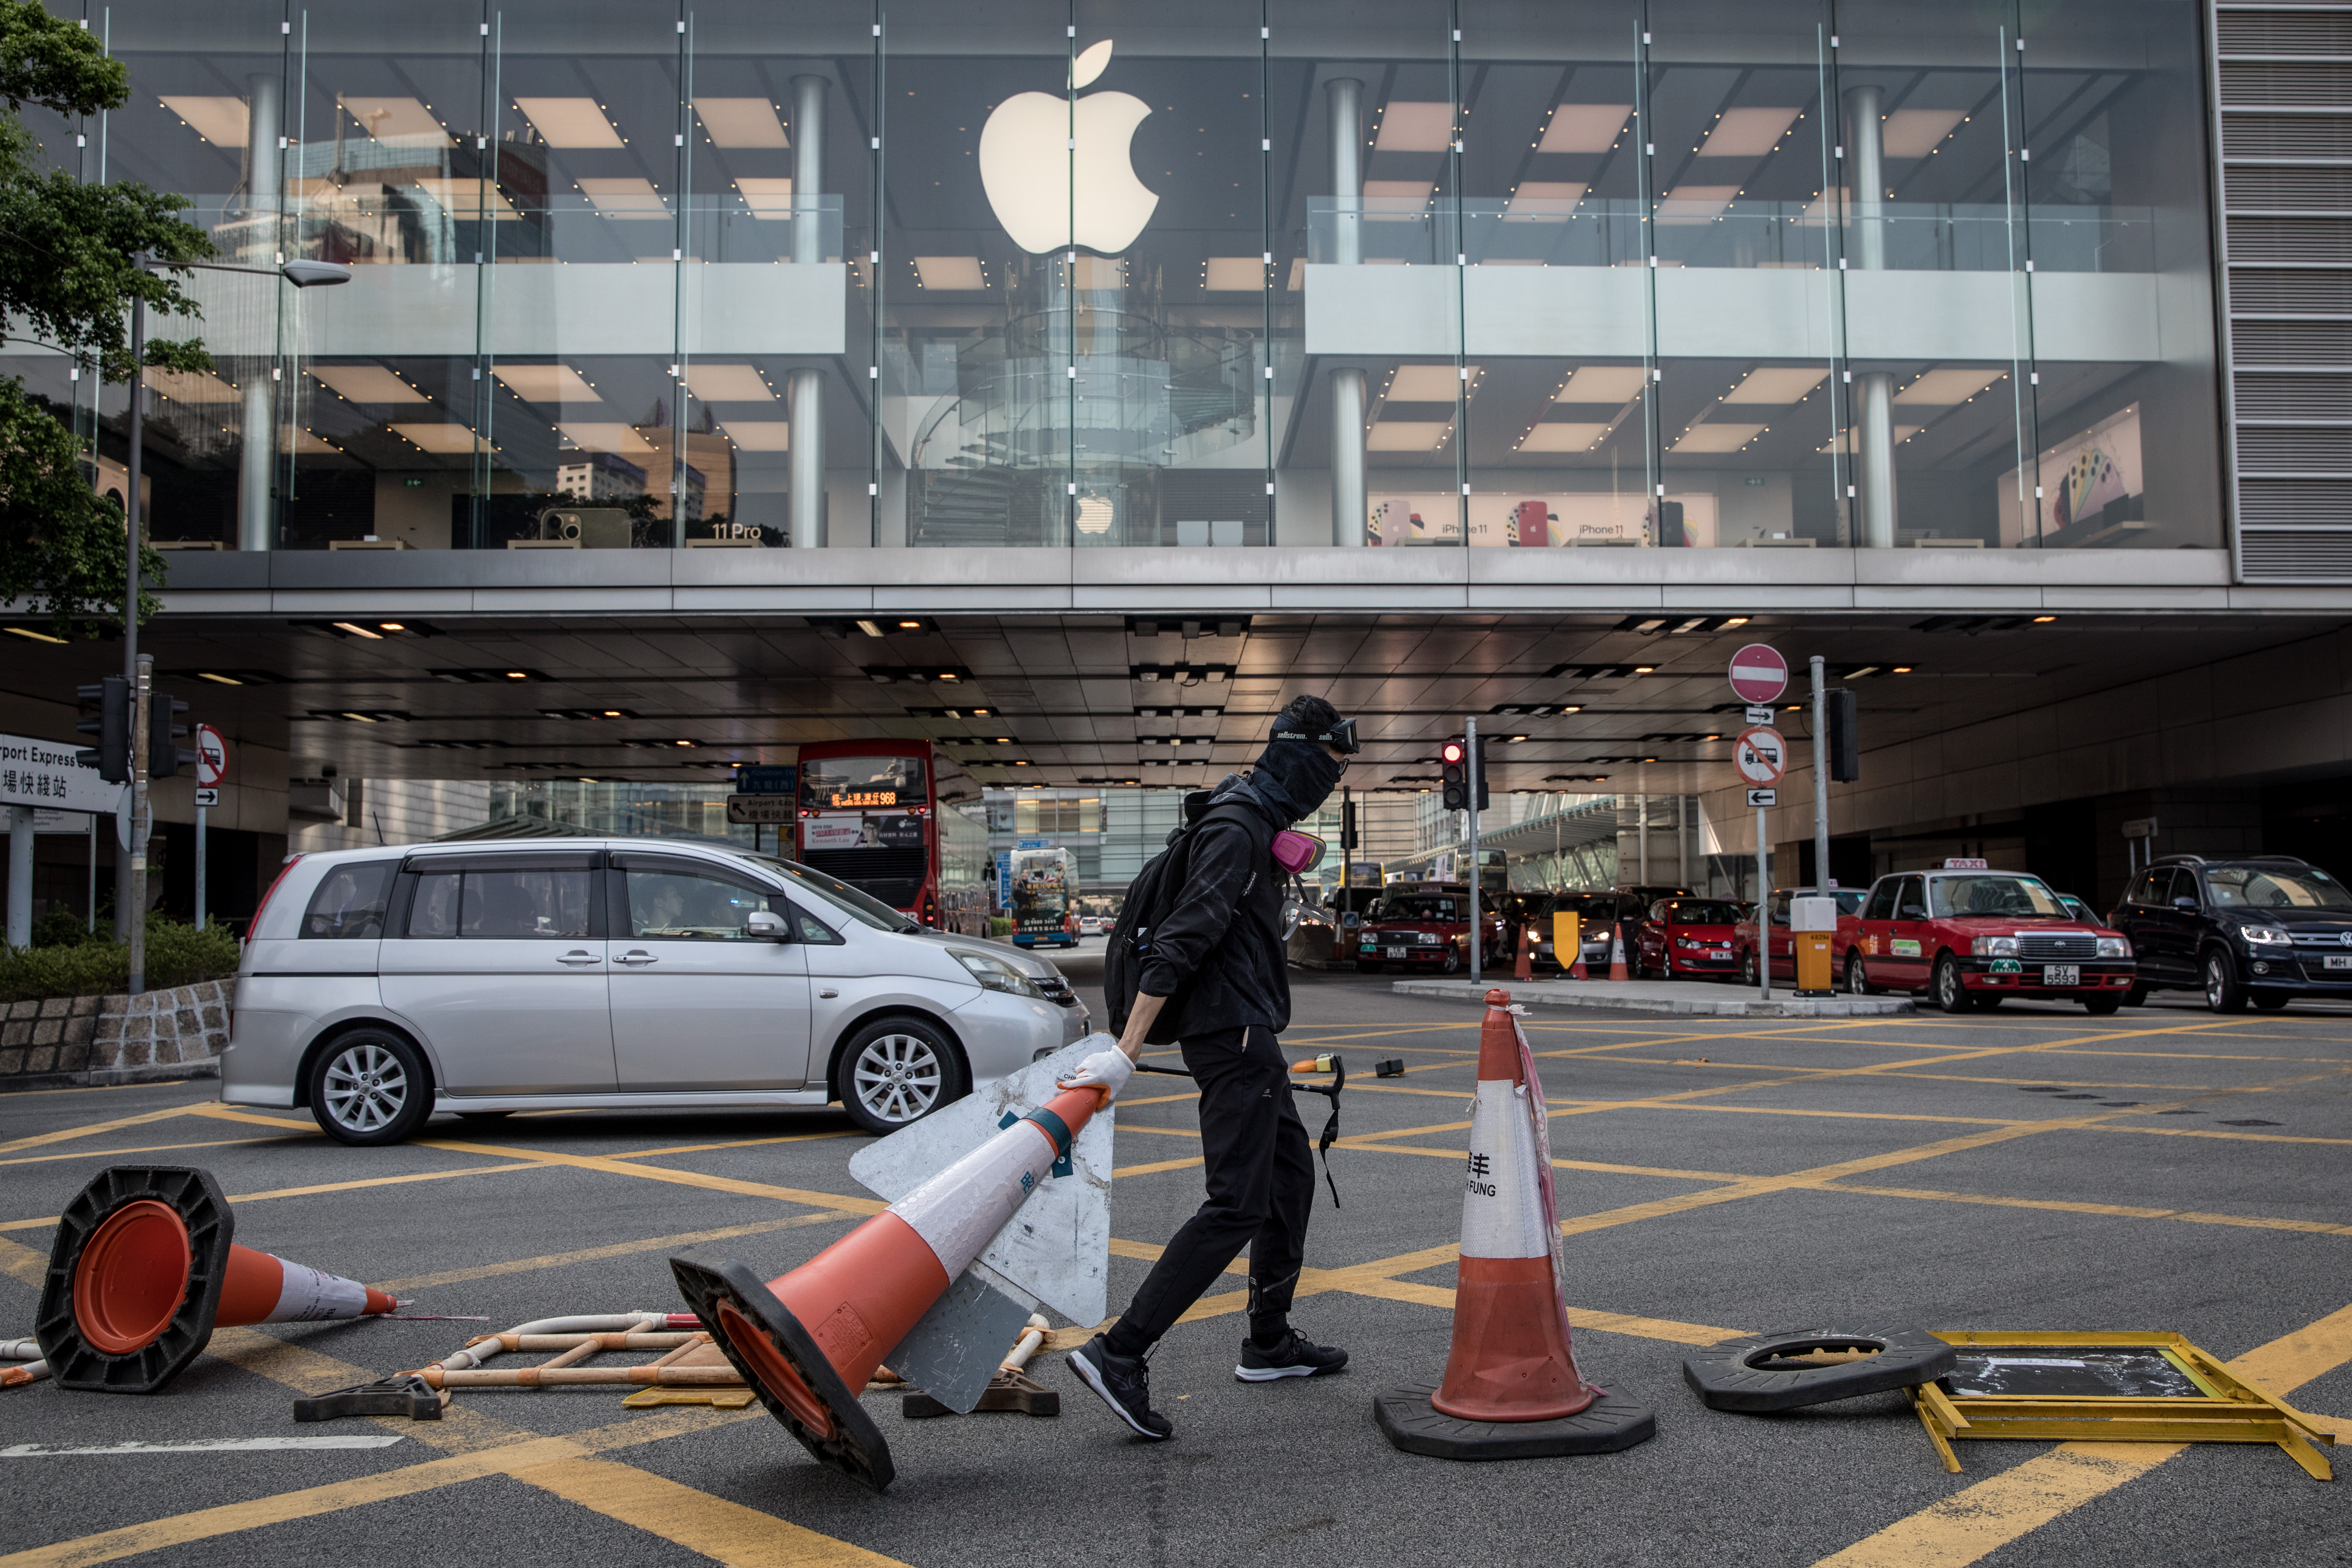 HONG KONG, CHINA - OCTOBER 01: A pro-democracy protester blocks a road outside the Apple store during clashes with police on October 01, 2019 in Hong Kong, China. Pro-democracy protesters marked the 70th anniversary of the founding of the People's Republic of China in Hong Kong through demonstrations as the city remains on the edge with the anti-government movement entering its fourth month. Protesters in Hong Kong continue its call for Chief Executive Carrie Lam to meet their remaining demands since the controversial extradition bill has been withdrawn, which includes an independent inquiry into police brutality, the retraction of the word “riot” to describe the rallies, and genuine universal suffrage, as the territory faces a leadership crisis. (Photo by Chris McGrath/Getty Images)